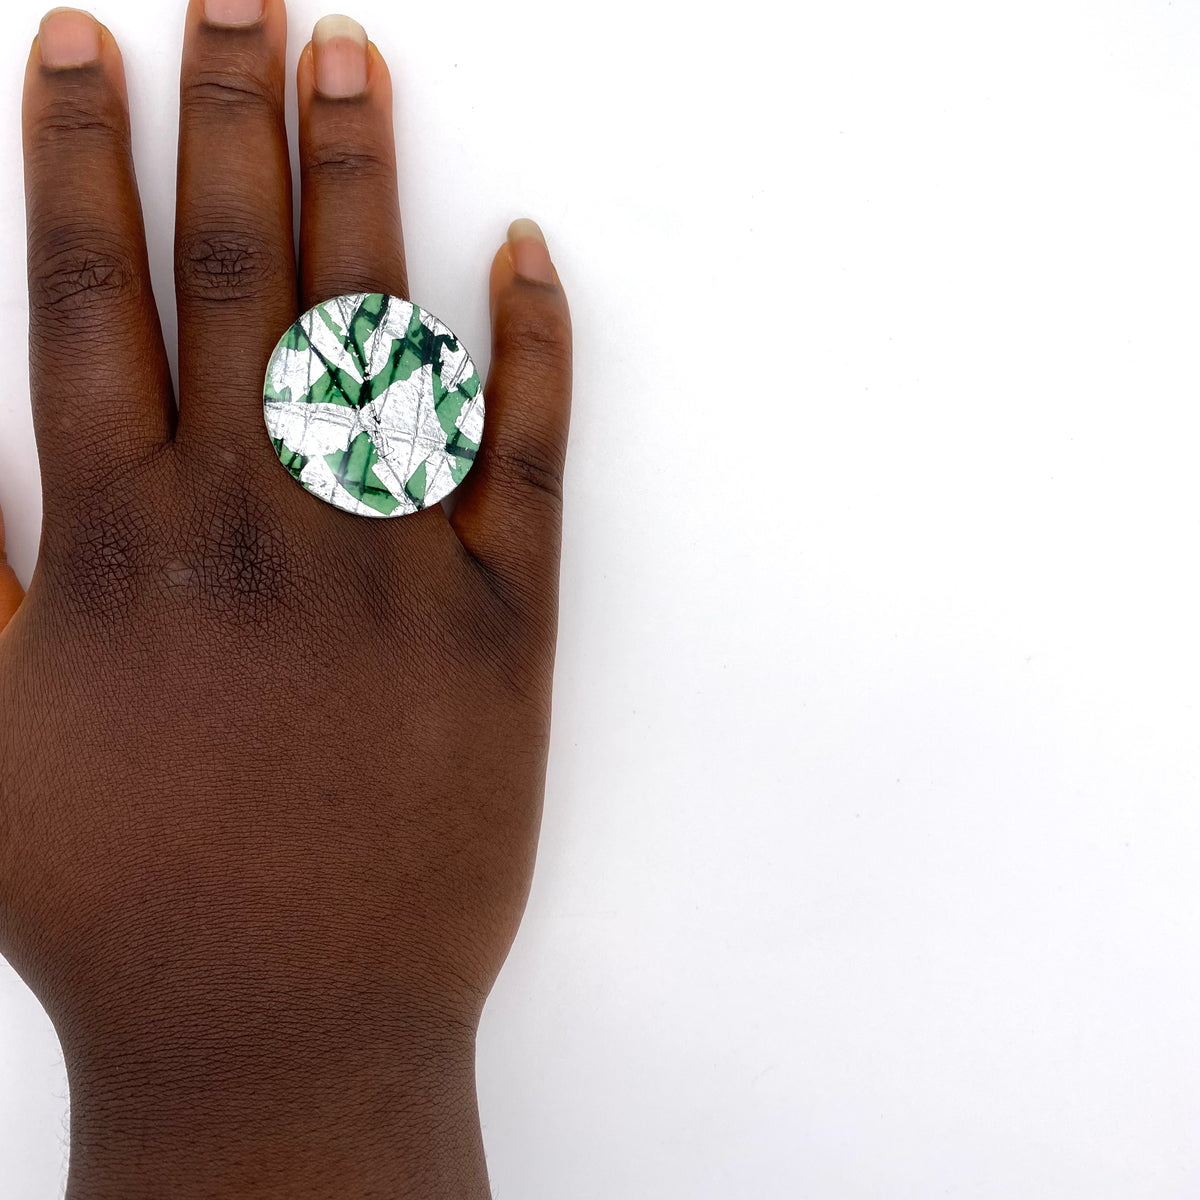 Ró cocktail ring in silver/jade